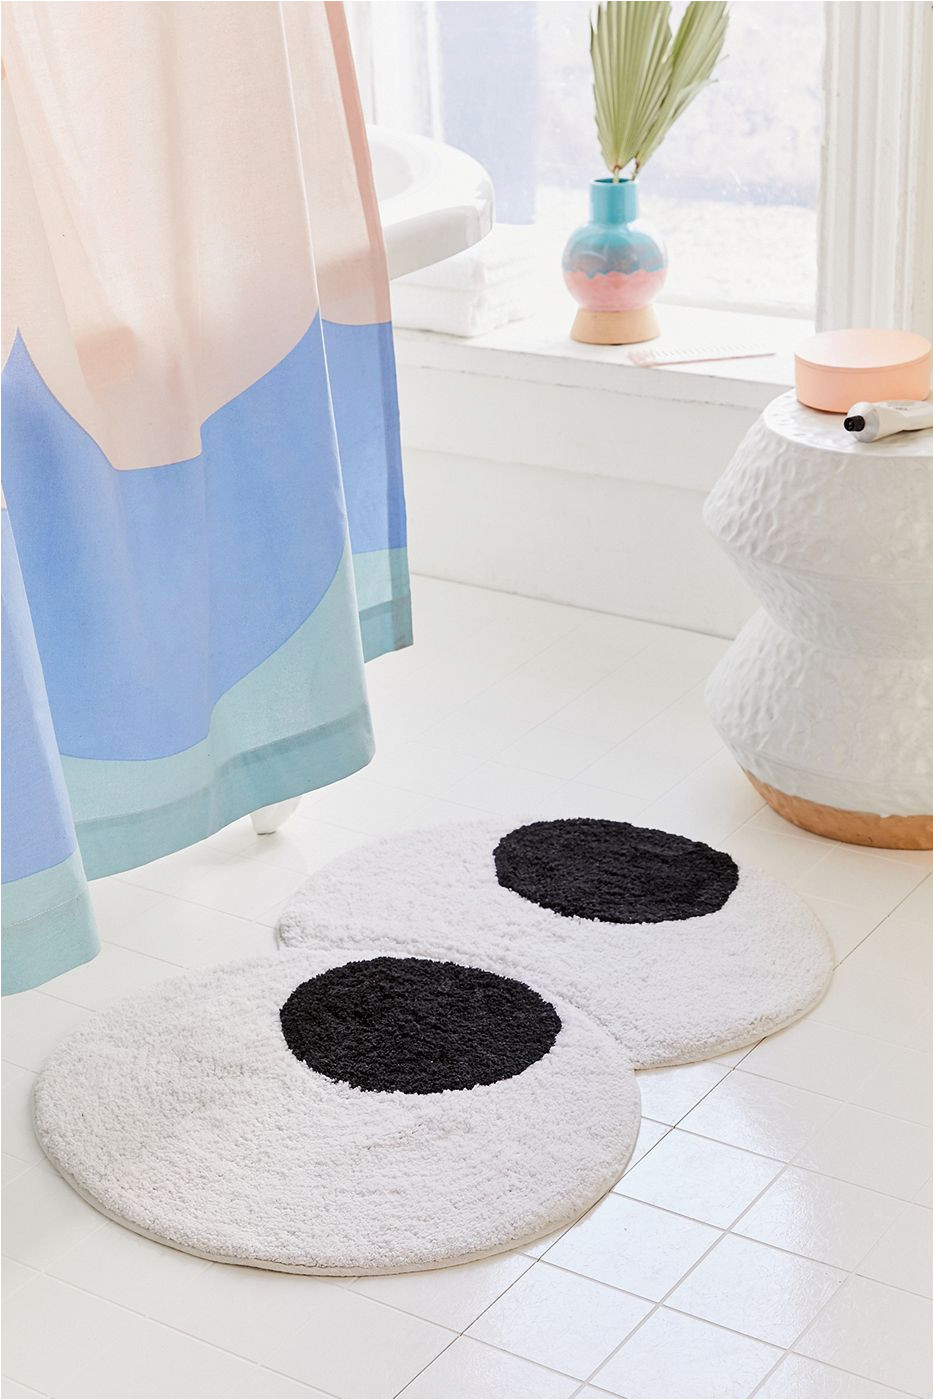 You Look Gorgeous Bath Rug 11 Funny Bath Mats Sure to Make You Smile Every Day Clever